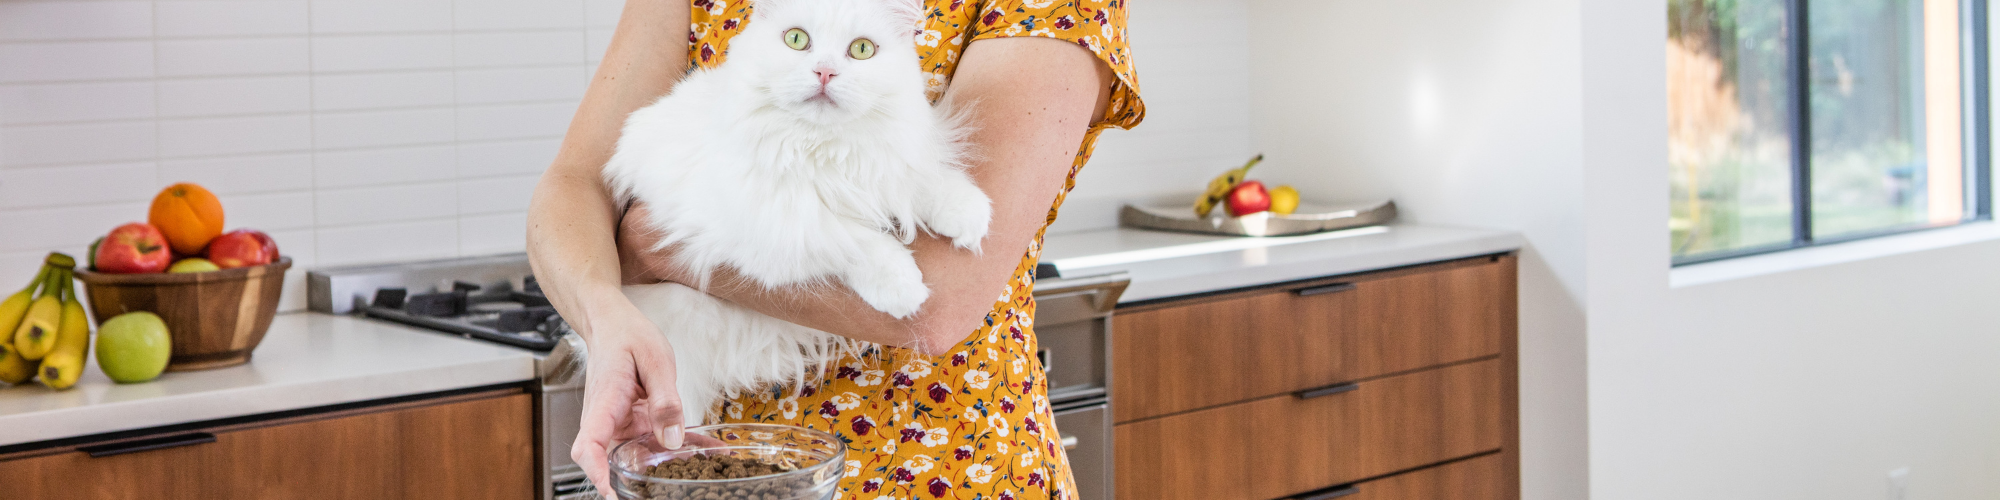 A woman holding a cat indoors in a kitchen setting.